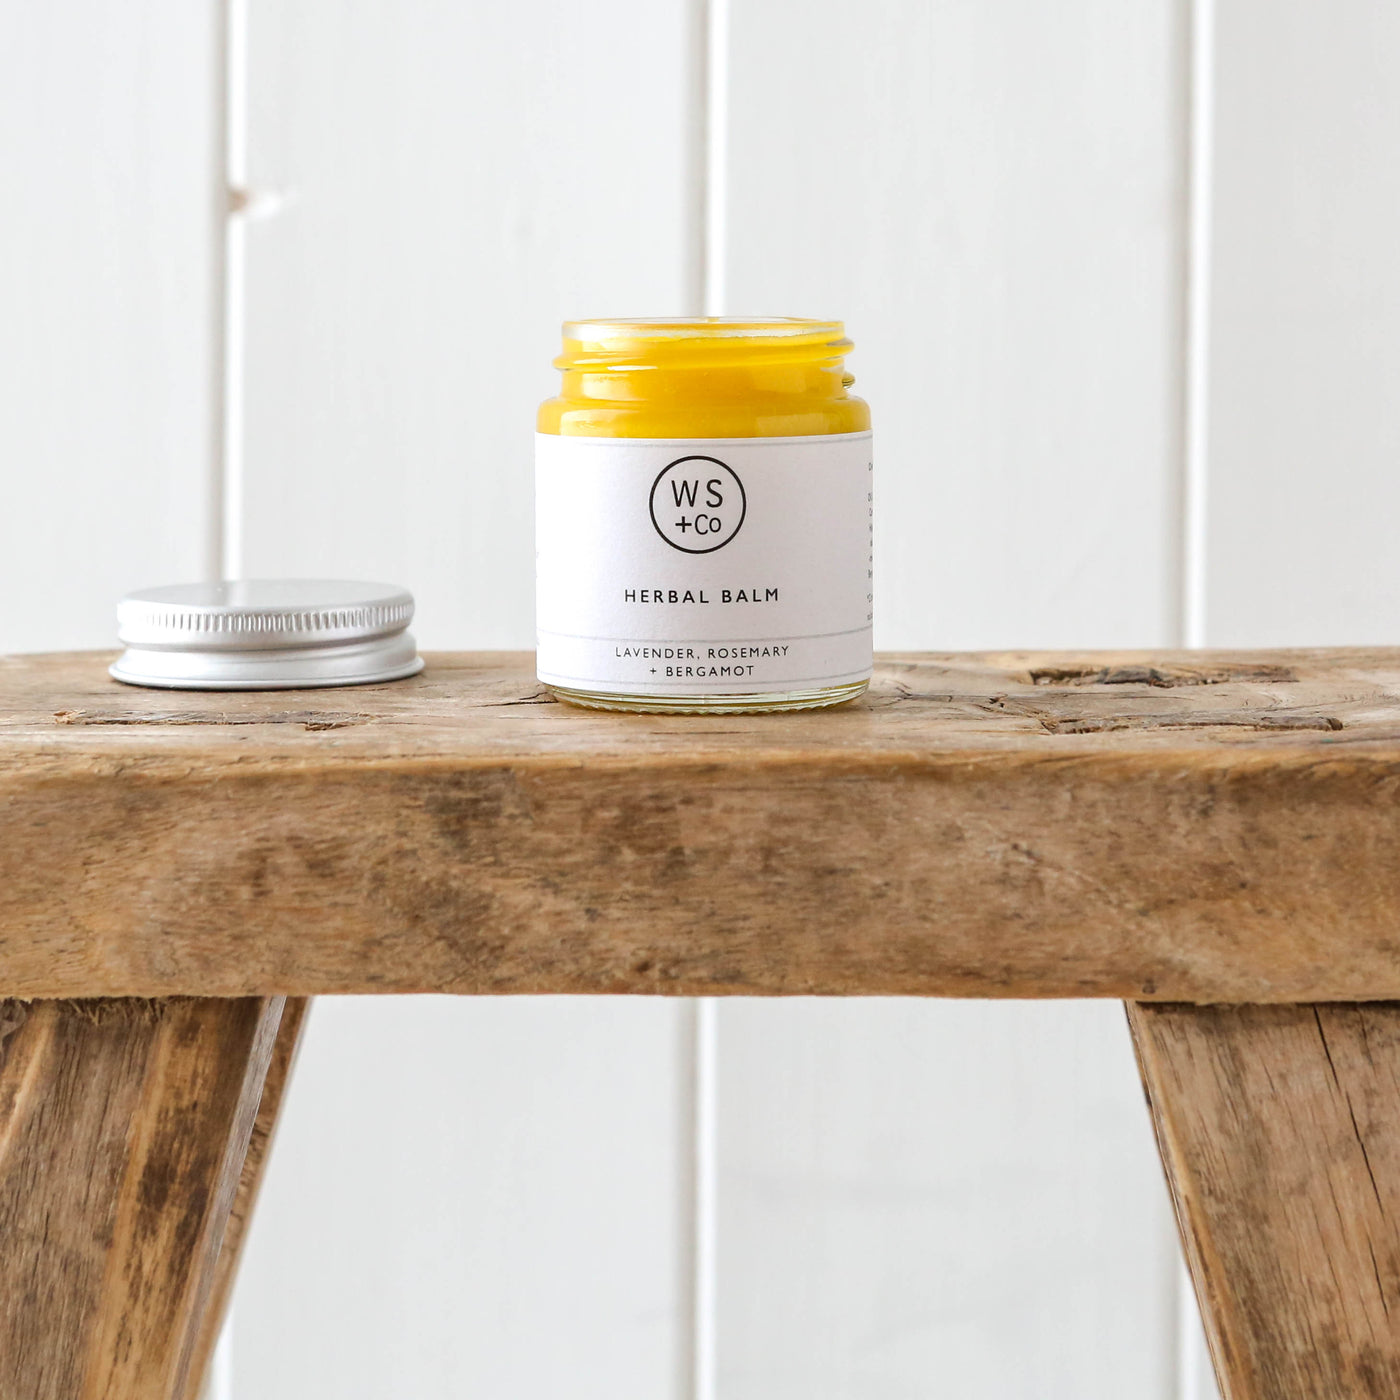 Herbal Balm by Wild Sage + Co